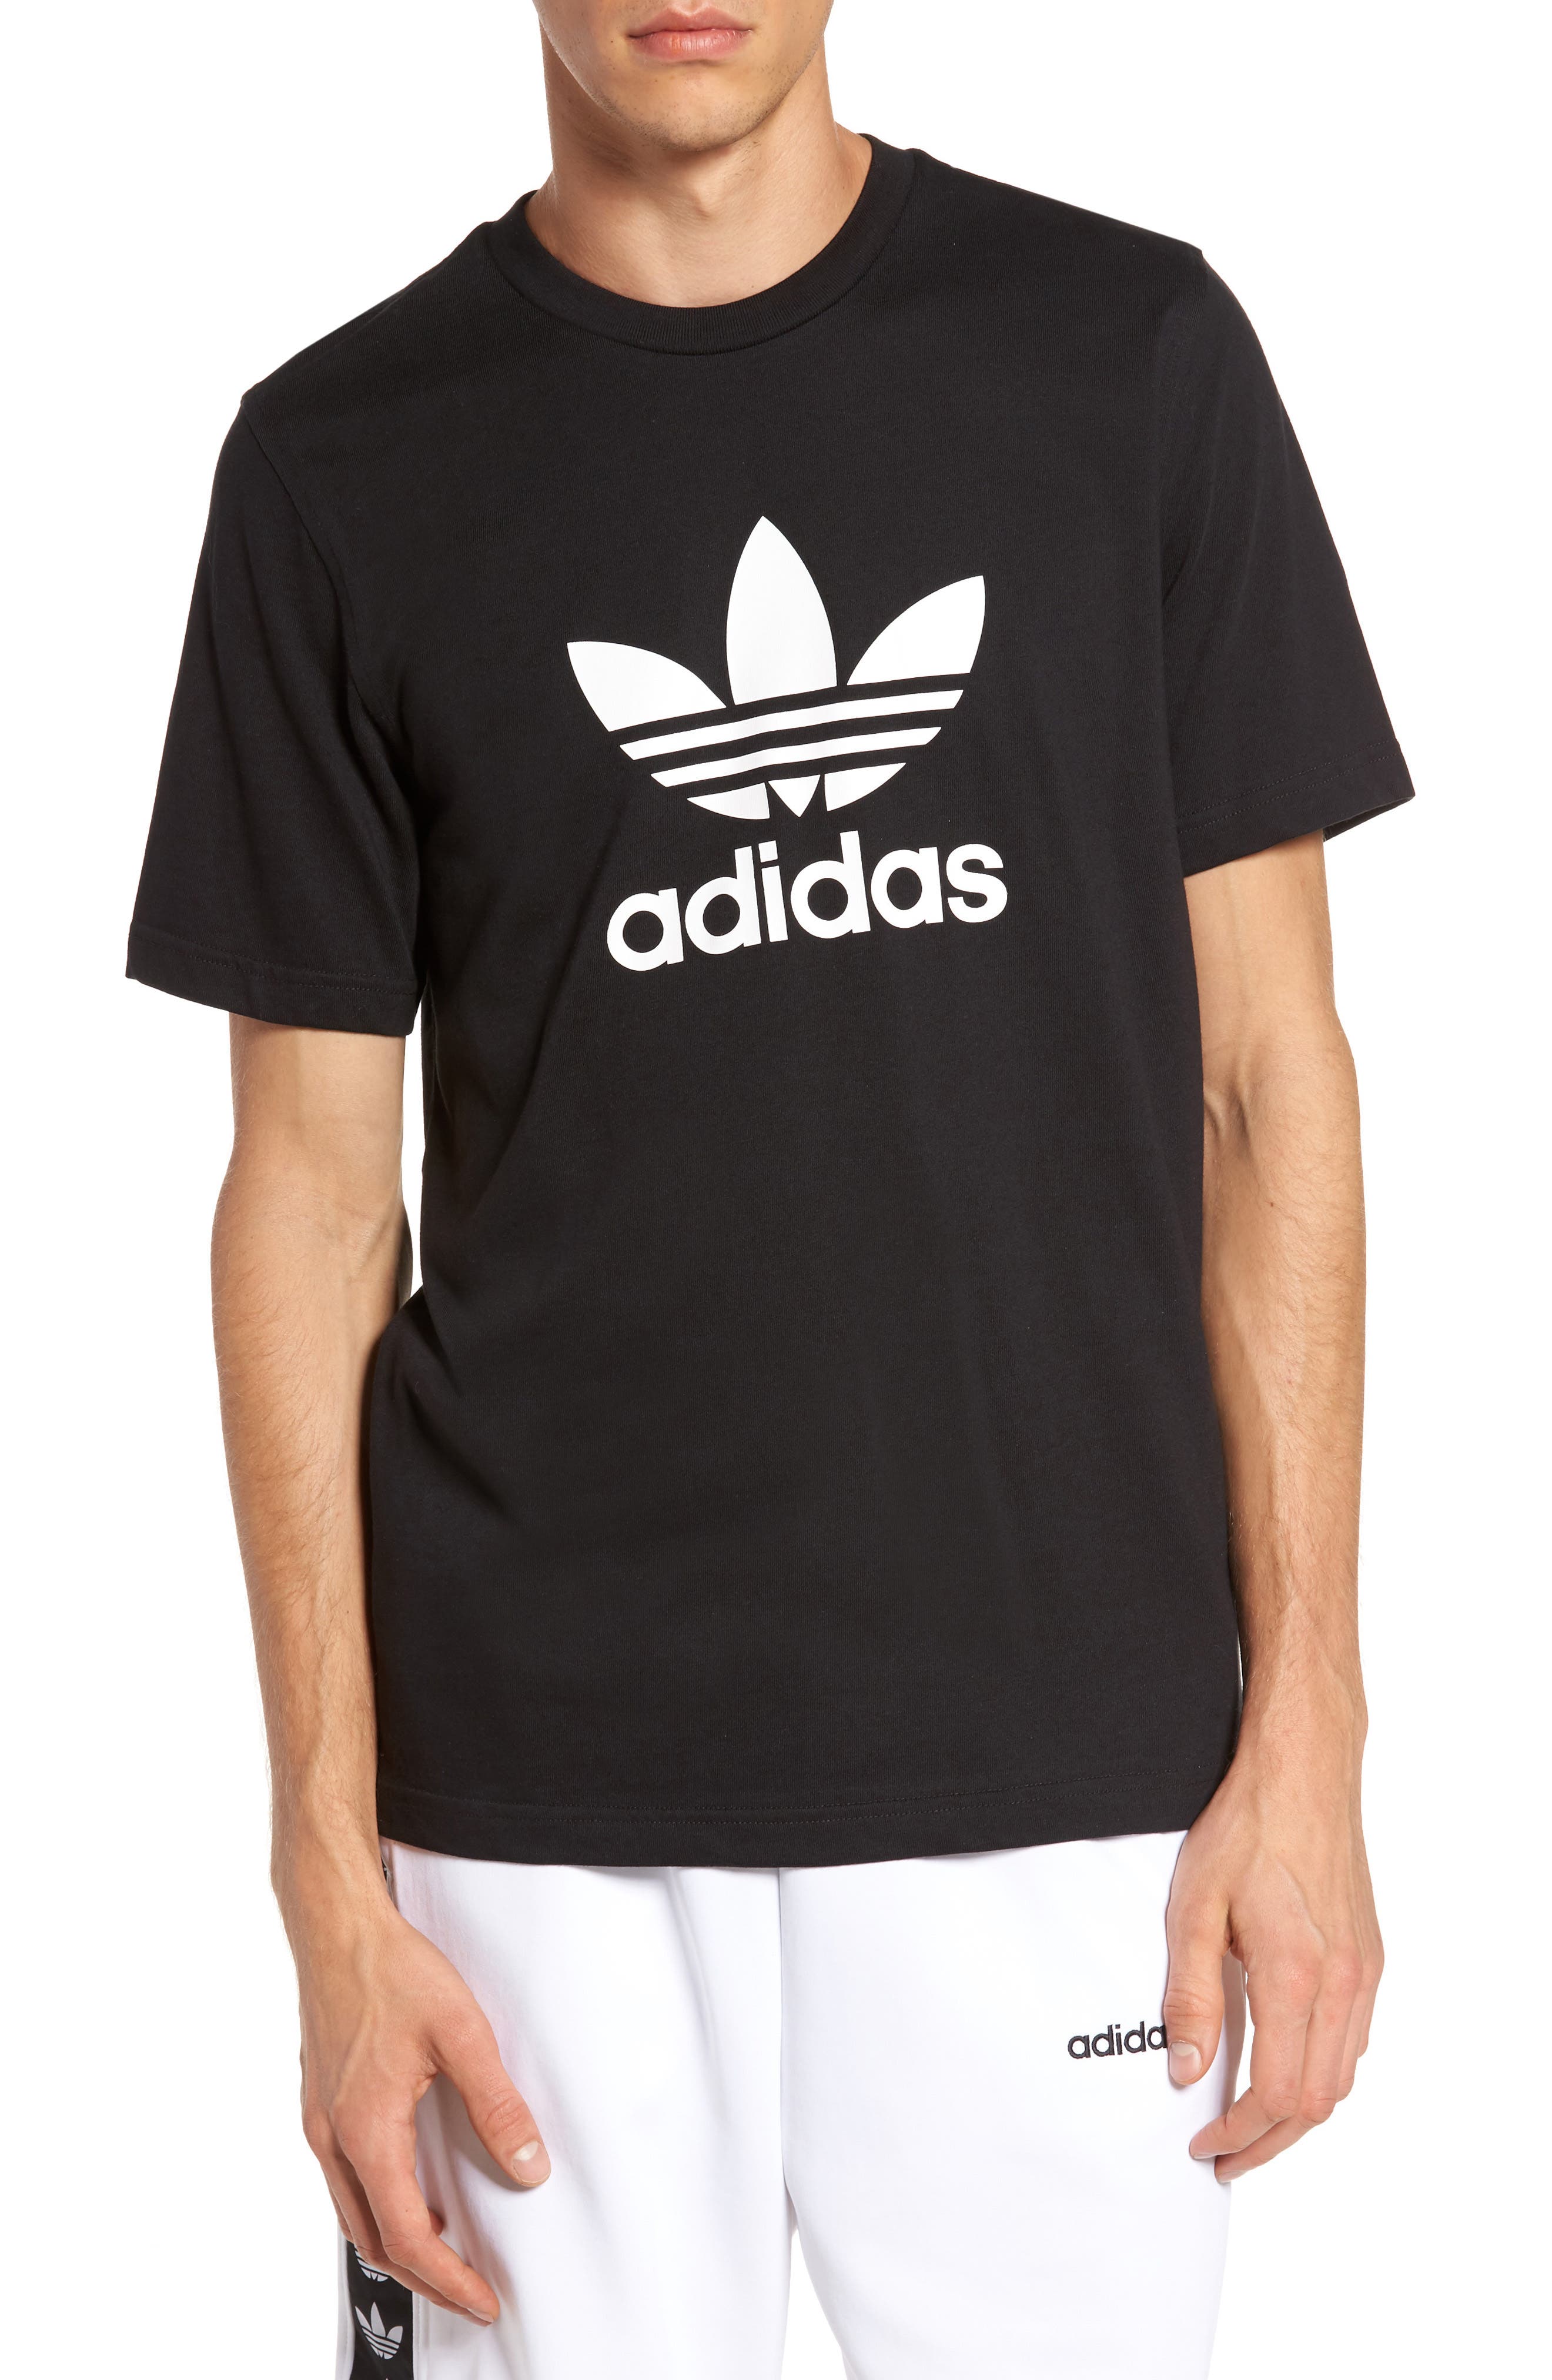 UPC 191034250452 product image for adidas Originals Trefoil Graphic T-Shirt in Black at Nordstrom, Size X-Large Us | upcitemdb.com